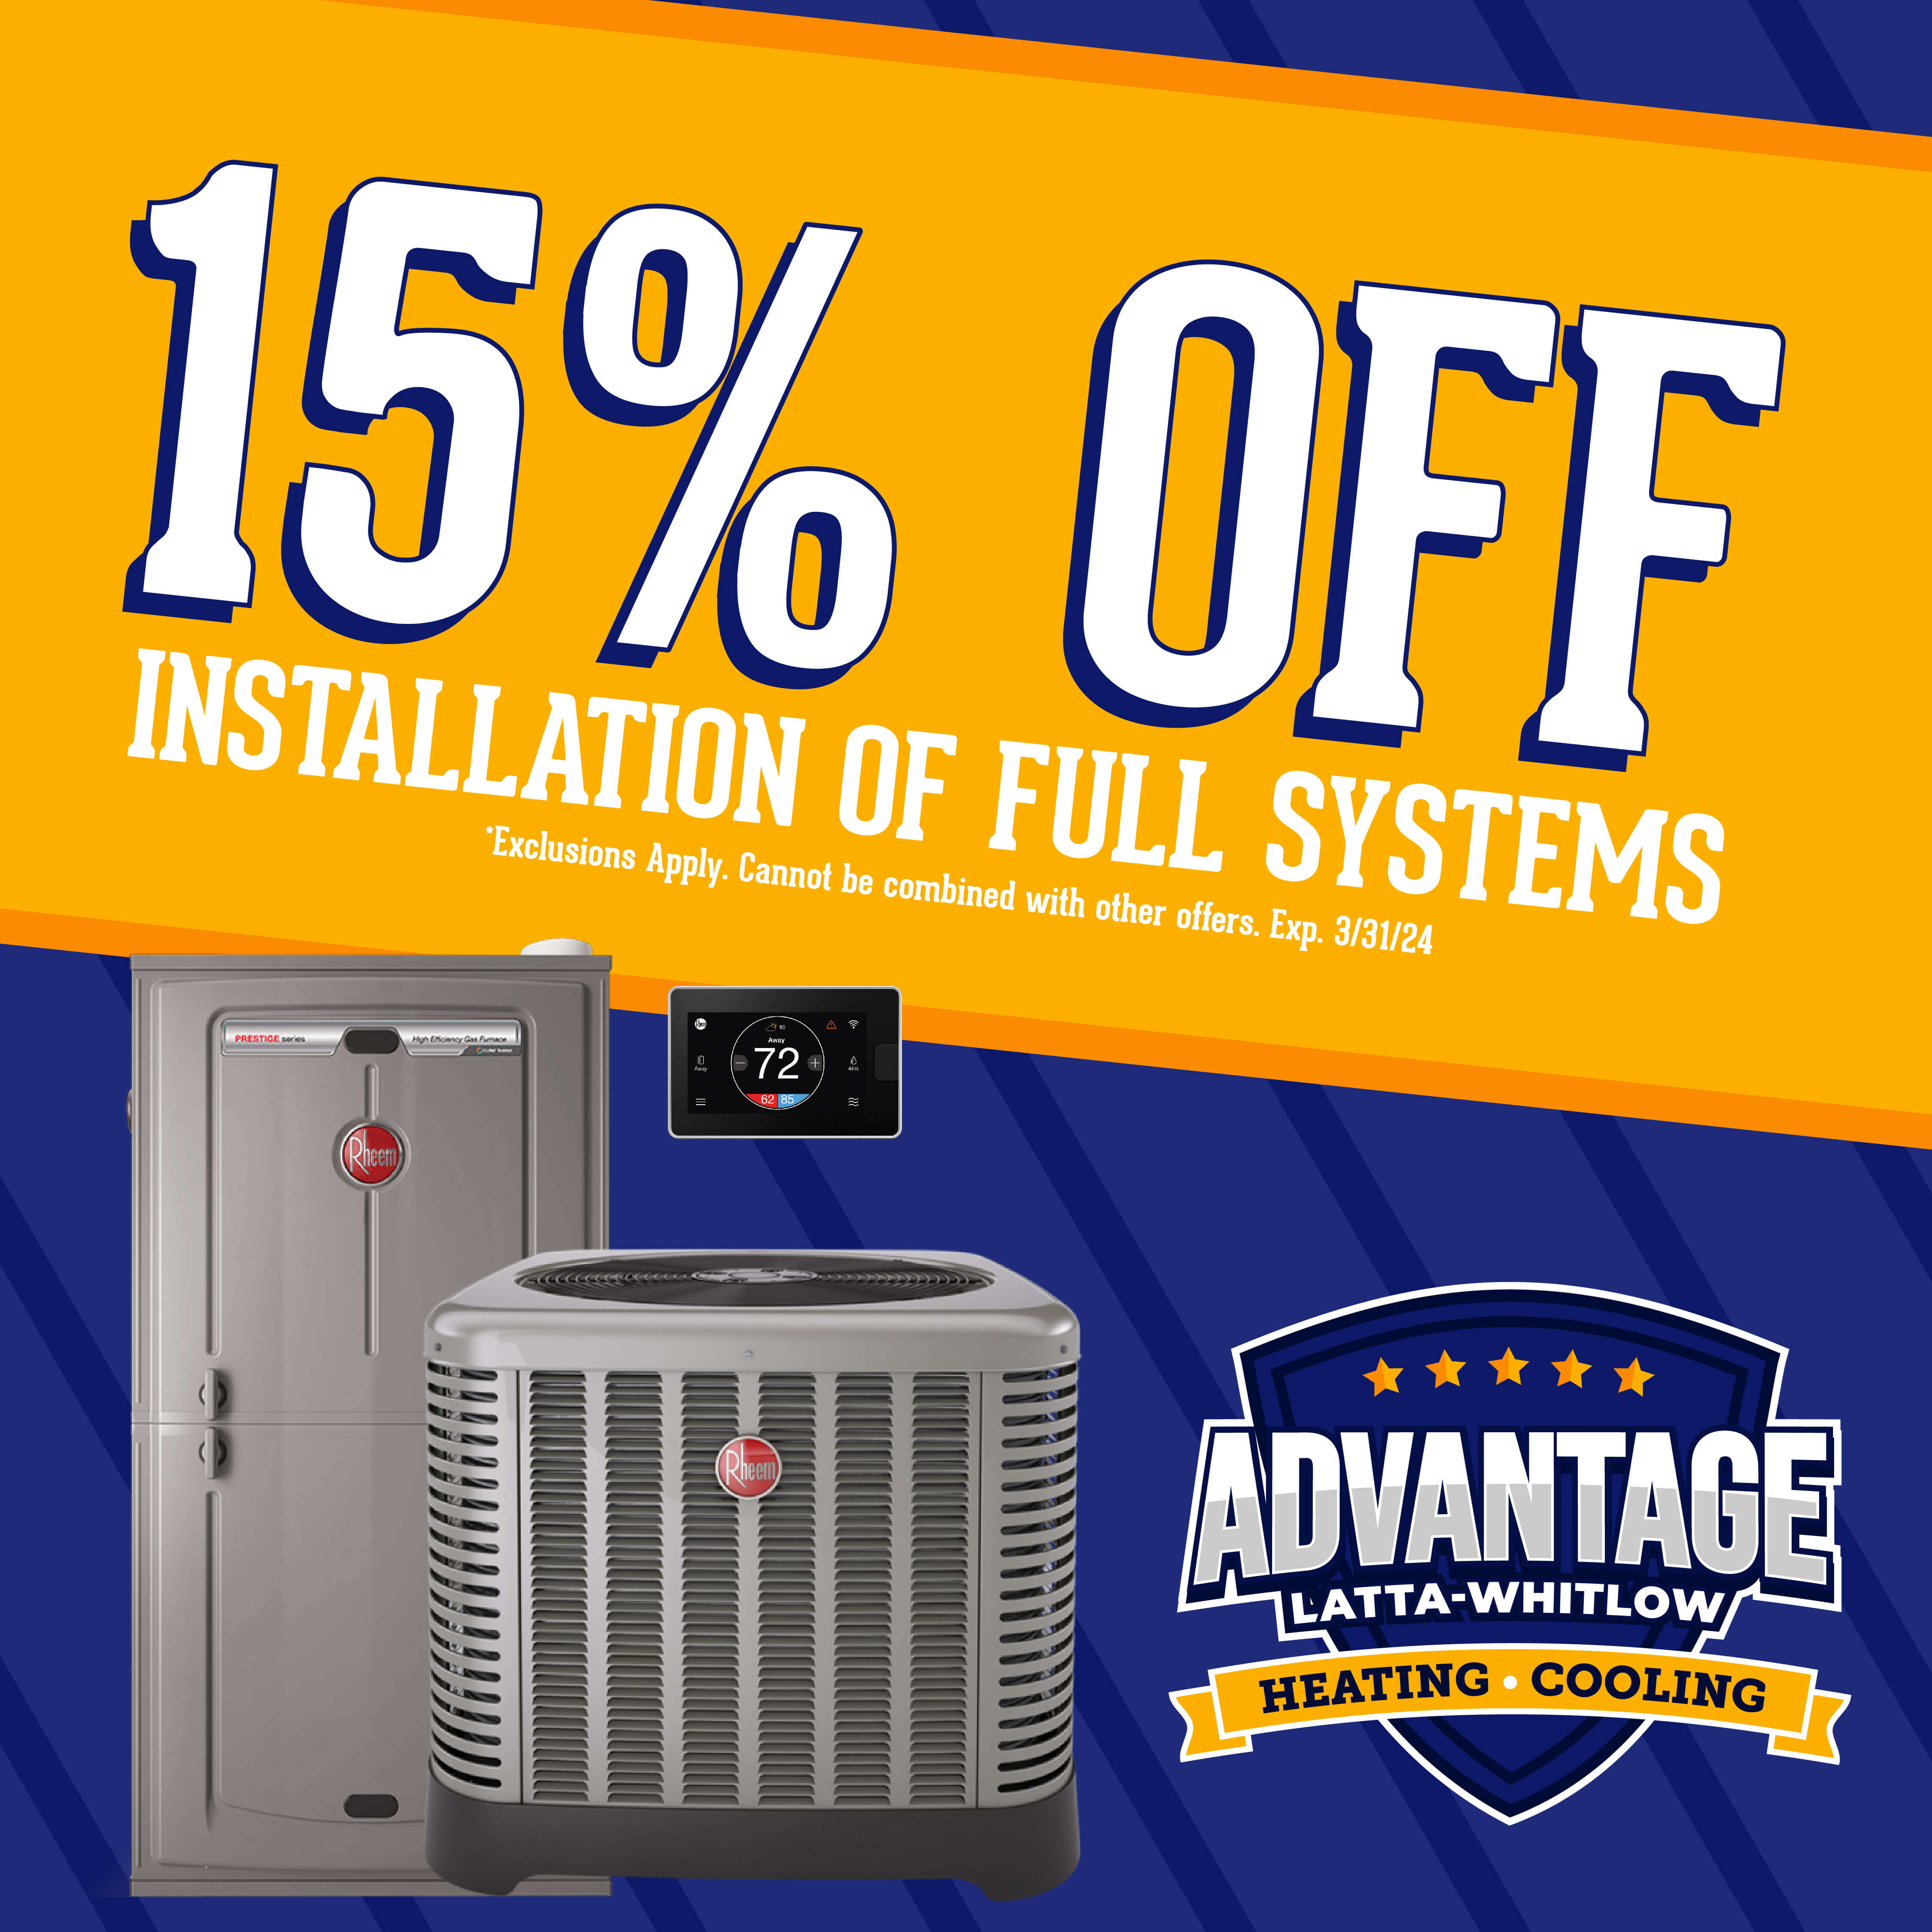 15% off installation of full systems.